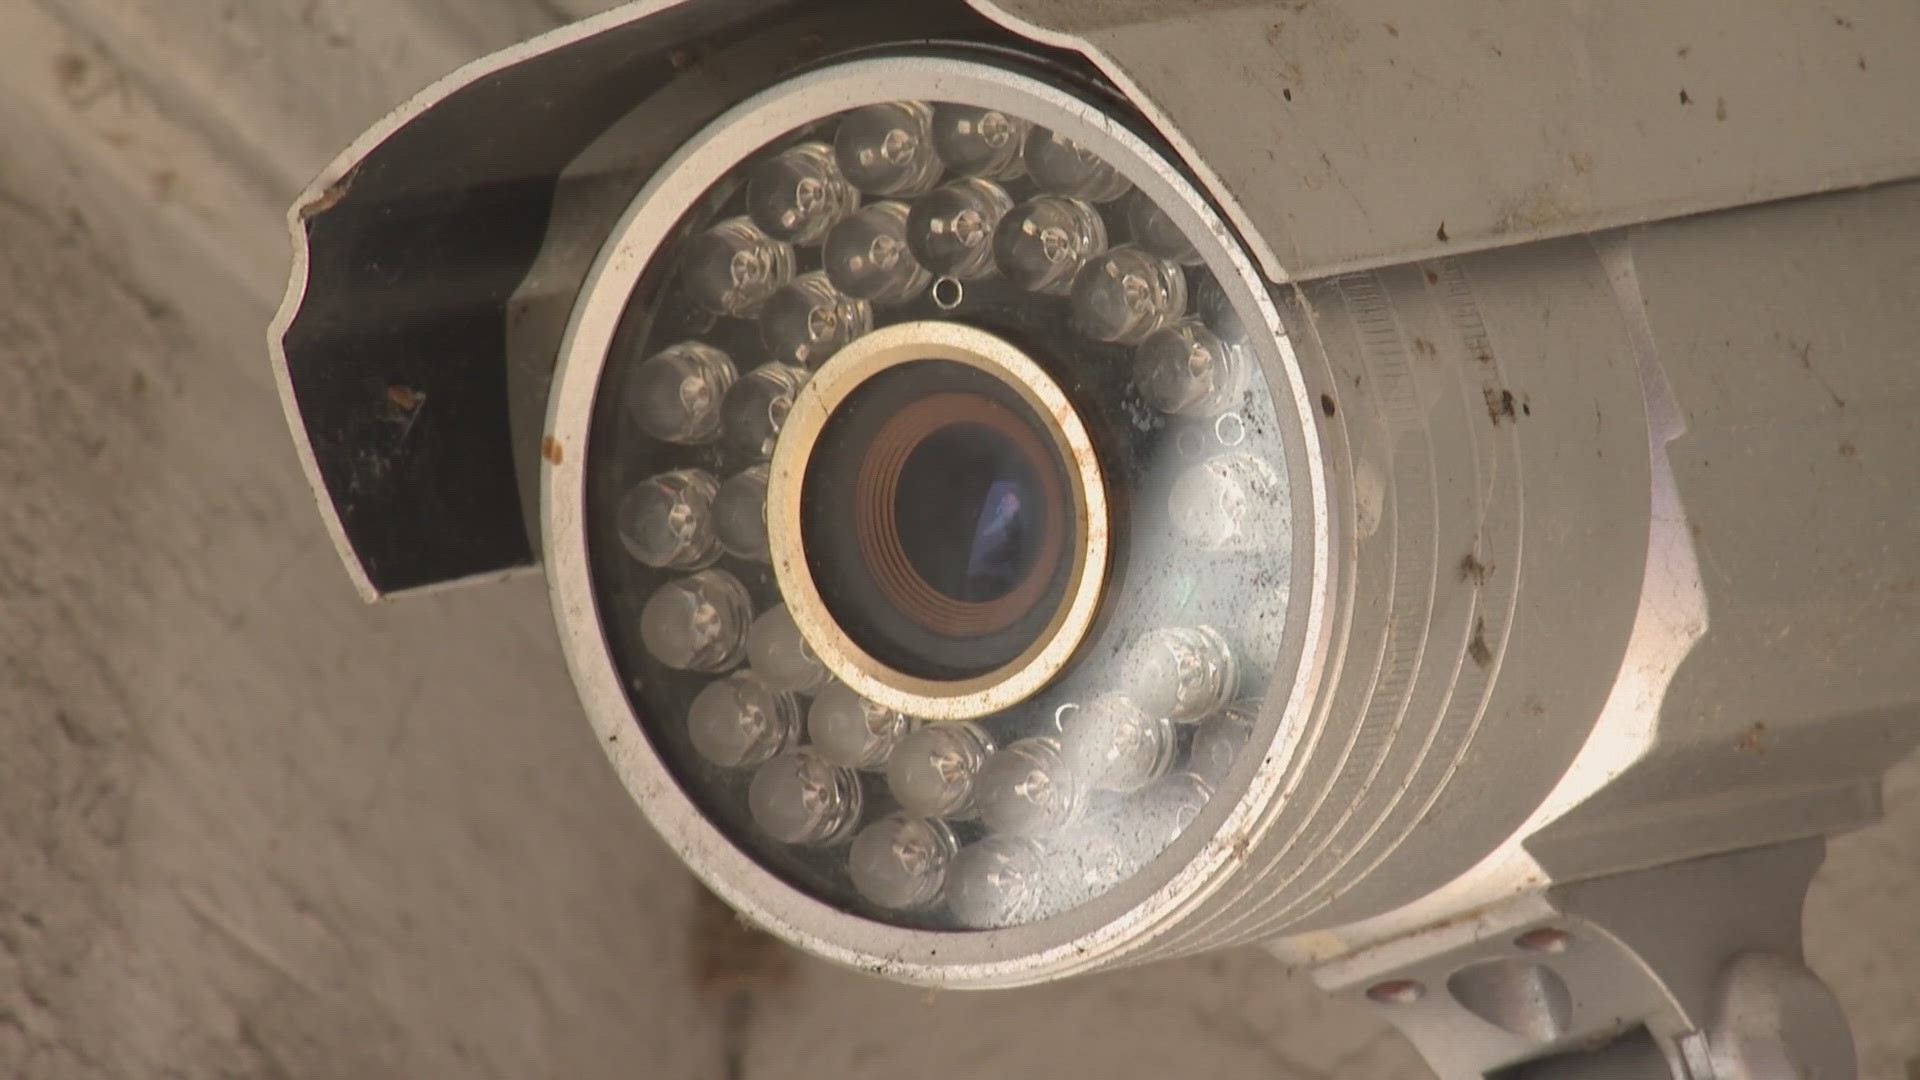 The ordinance requires surveillance at most businesses. If a crime occurs, the business must 'immediately' contact police and provide 'immediate access' to video.